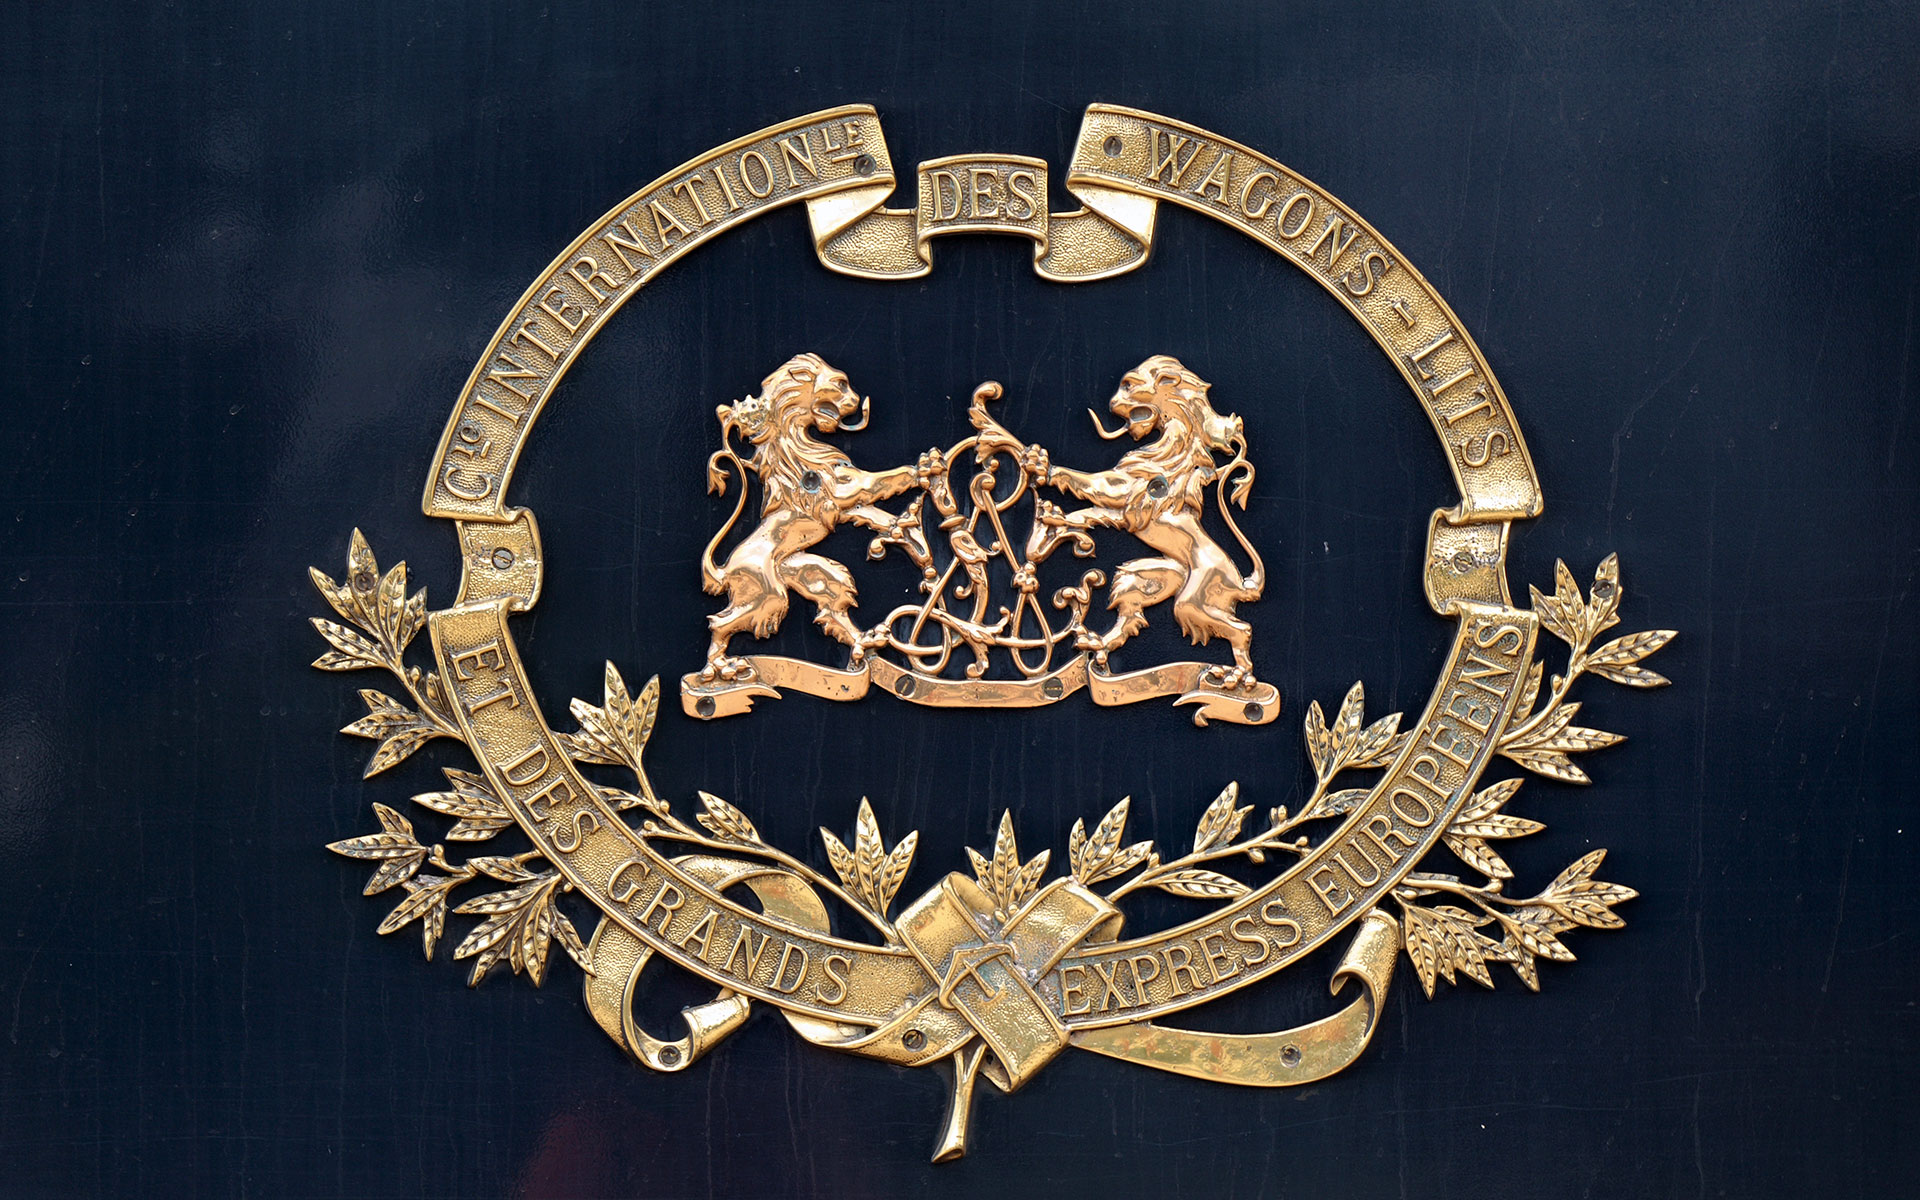 Crest of the Wagons-Lits company that used to run the Orient Express (photo © Presiyan Panayotov).